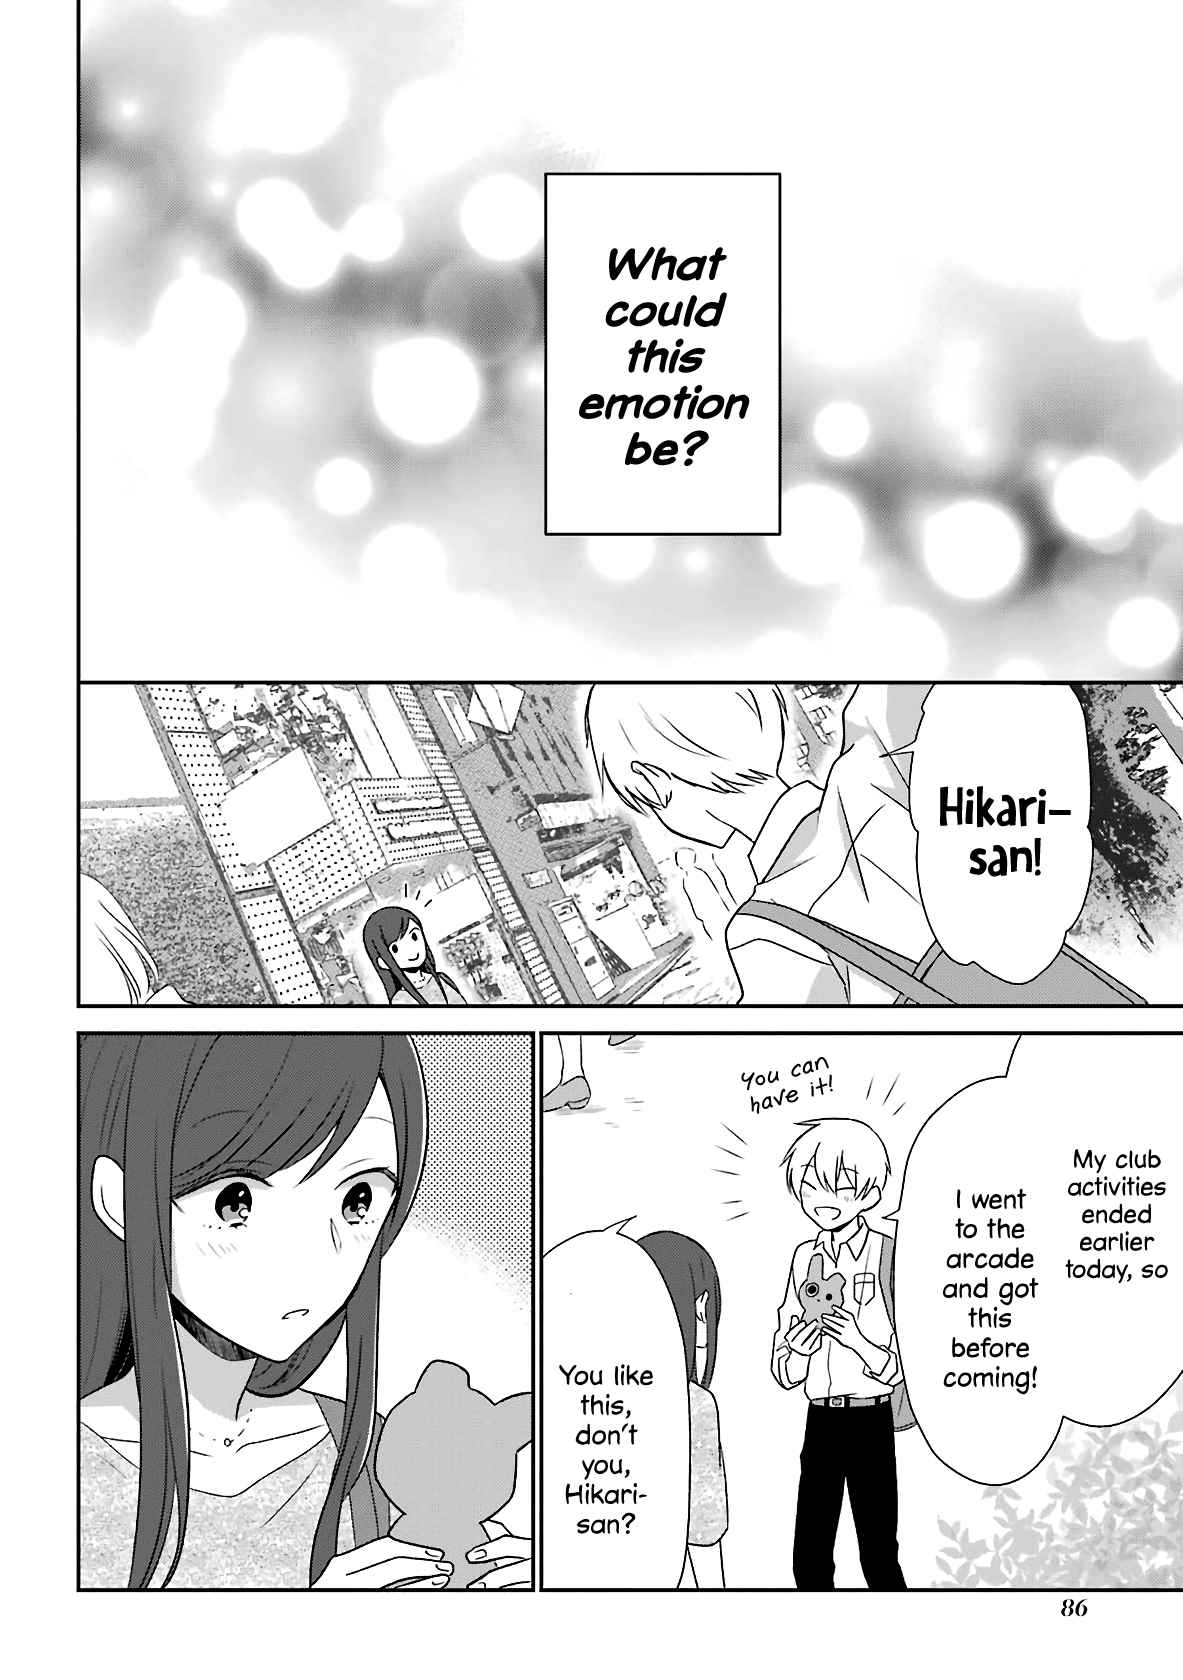 I'm Only 14 But I'll Make You Happy! Vol. 1 Ch. 6